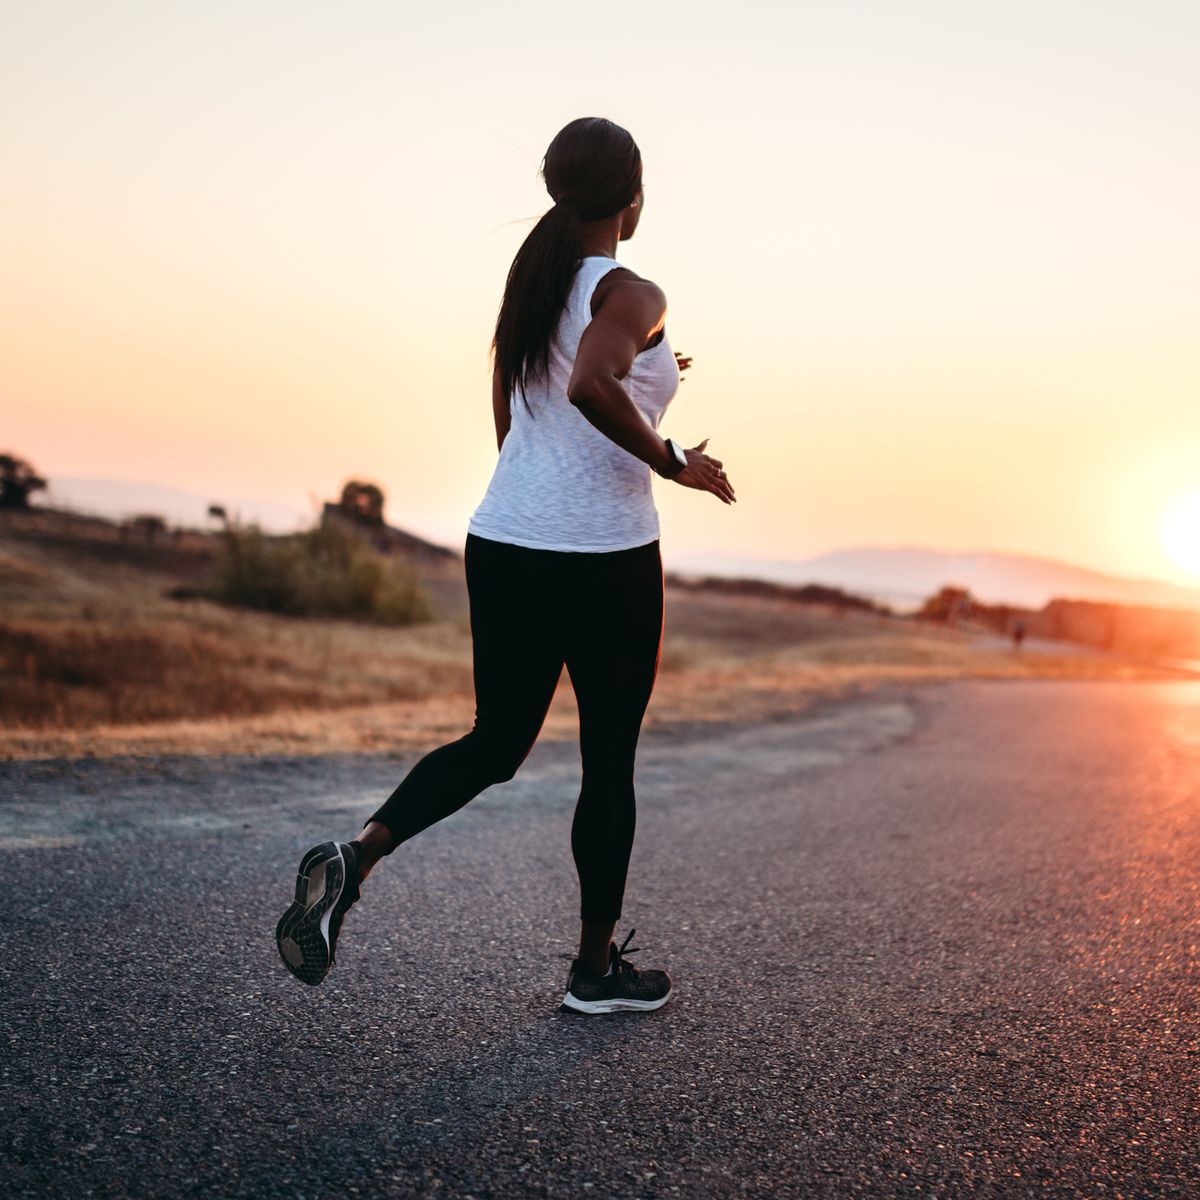 10 Tips for Healthy Running